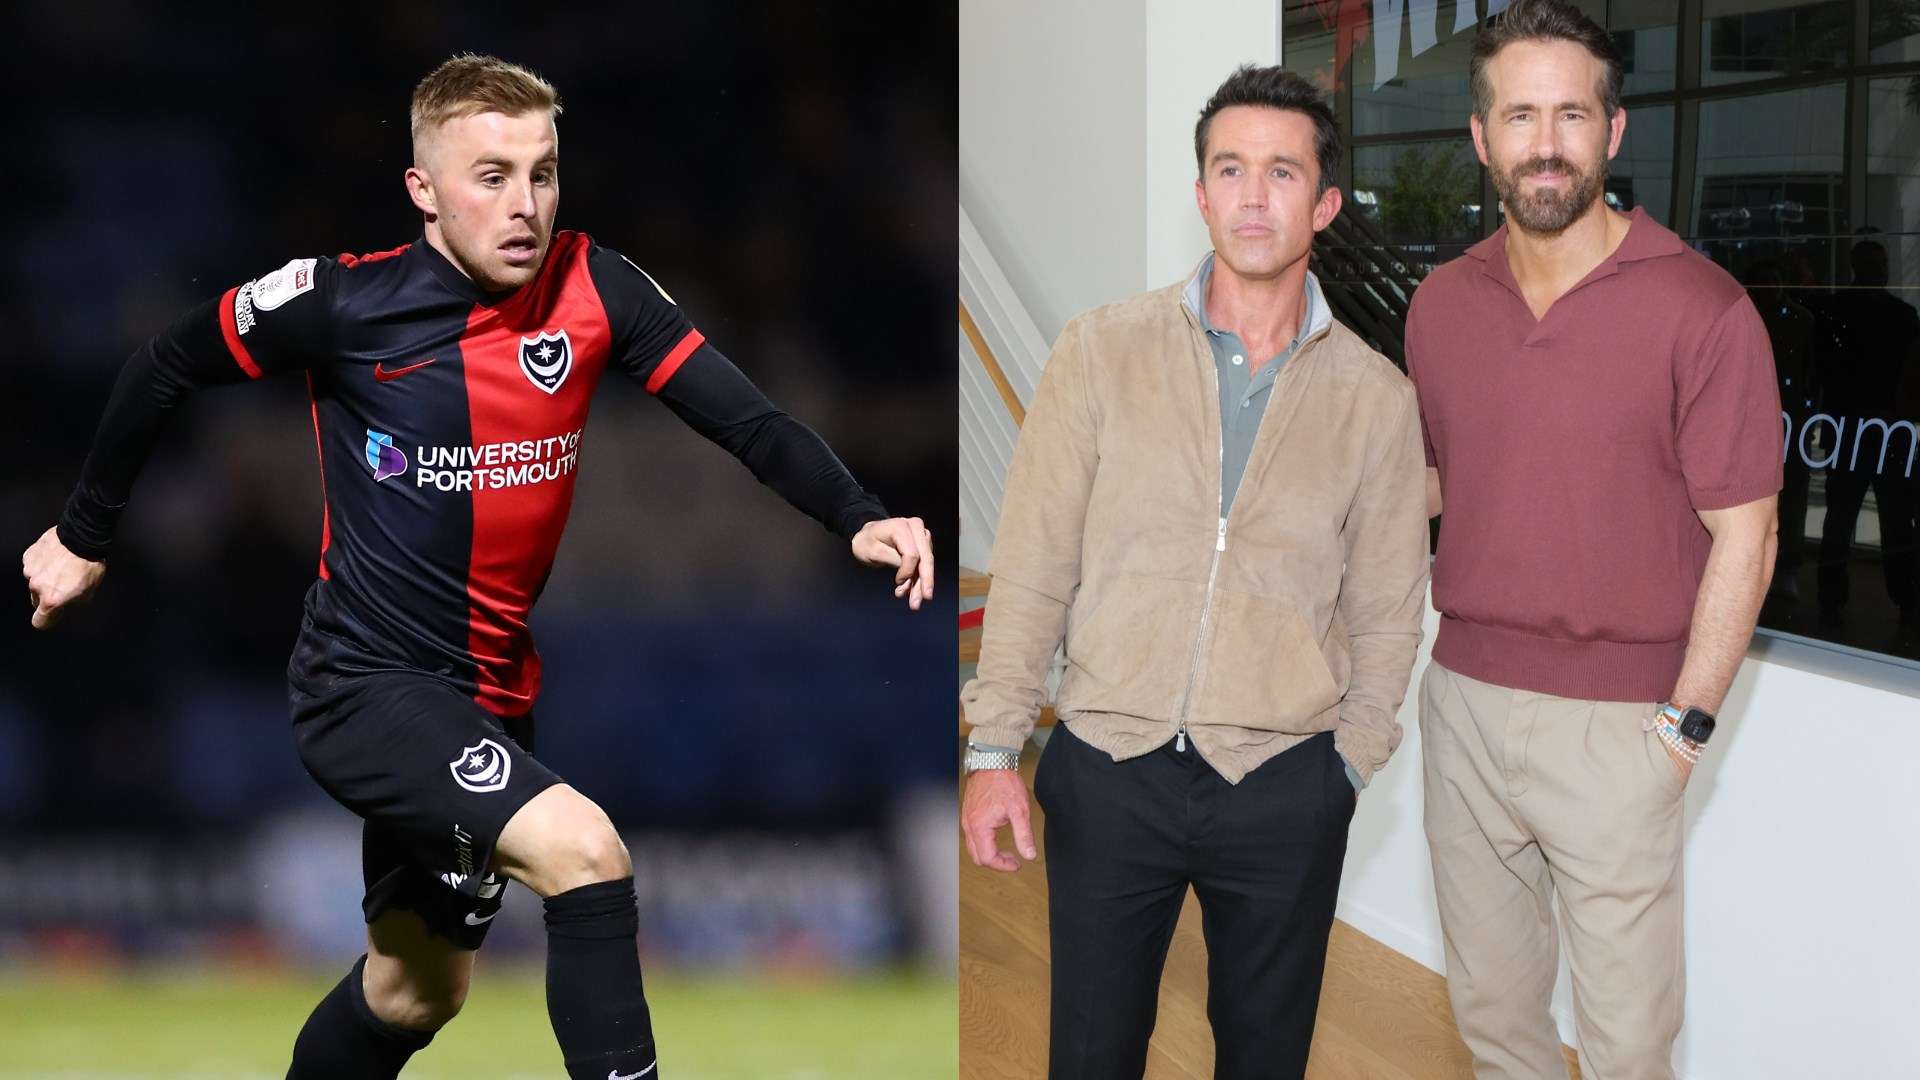 Portsmouth's Joe Morrell and Ryan Reynolds and Rob McElhenney